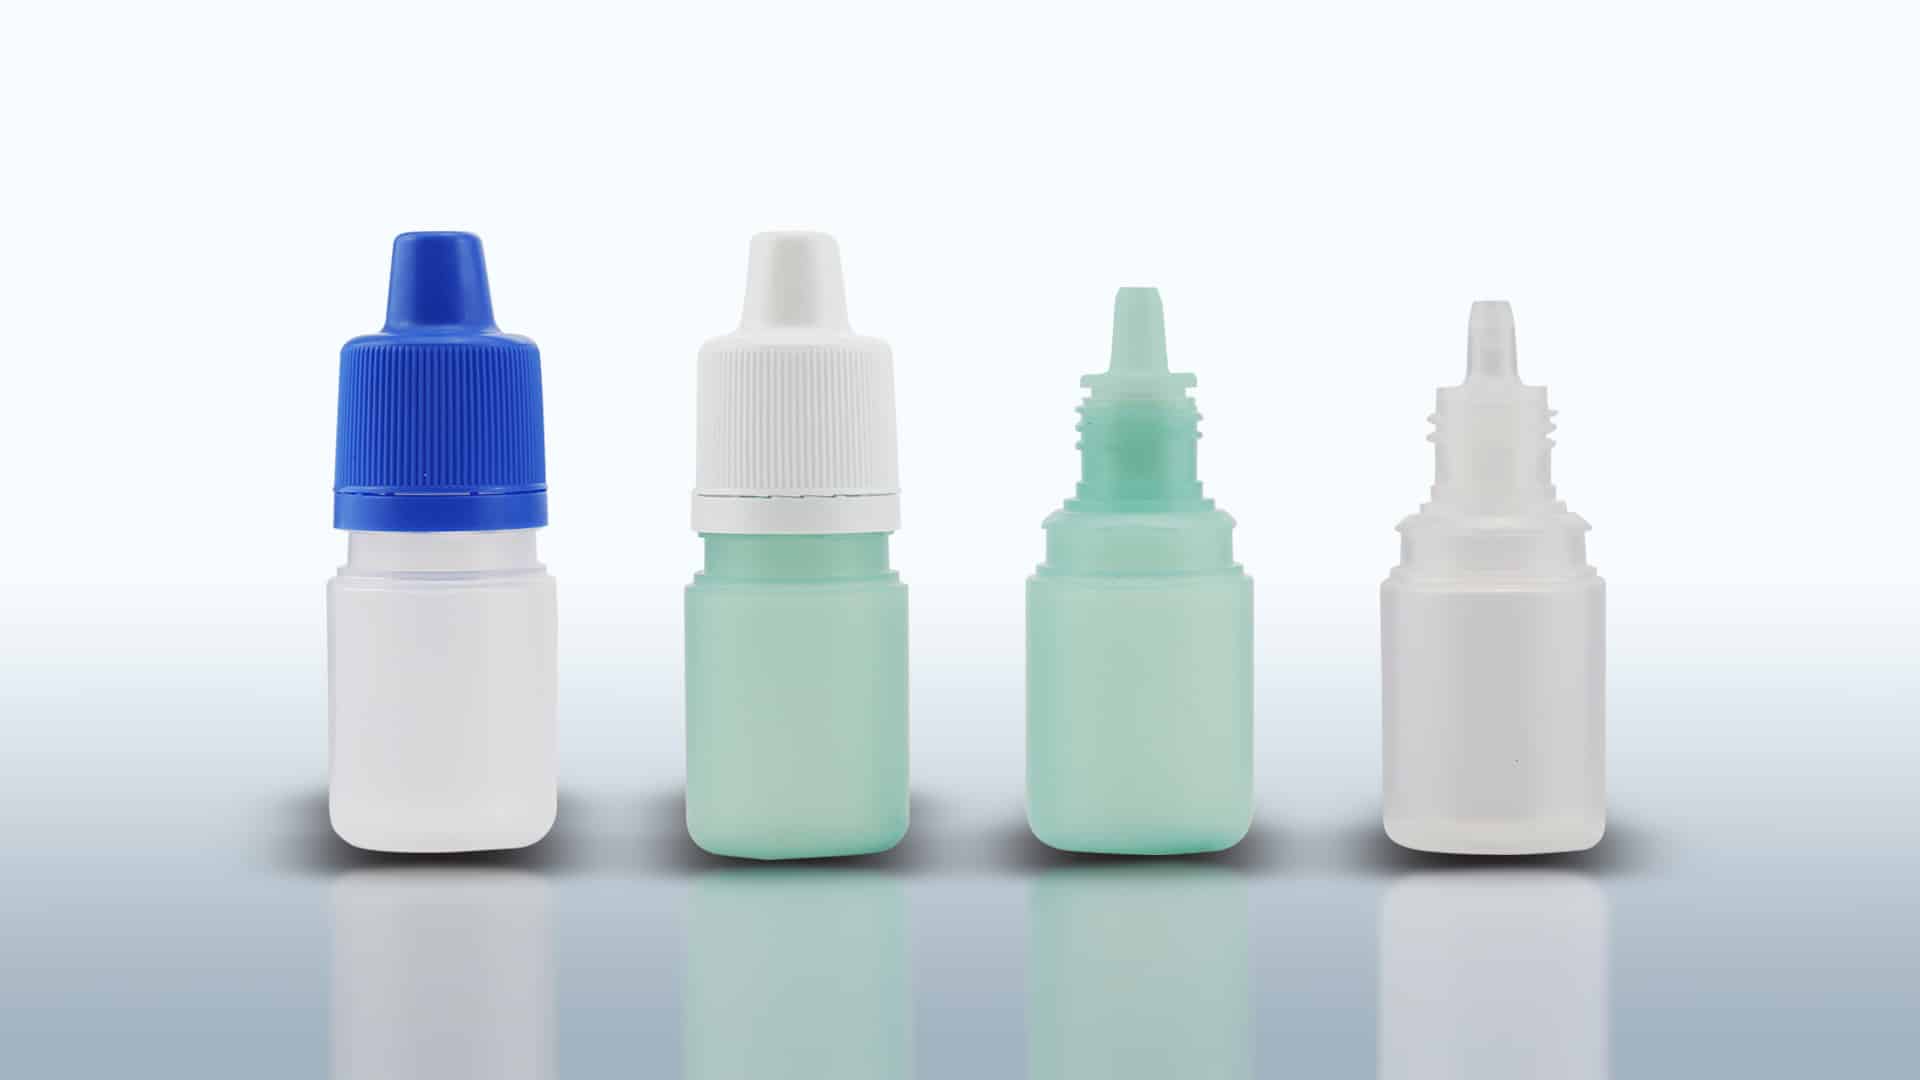 Ophthalmic primary packaging: ldpe bottle, tip, screw cap with tamper evident. Standard bottle capacity from ml 5 to ml 15.